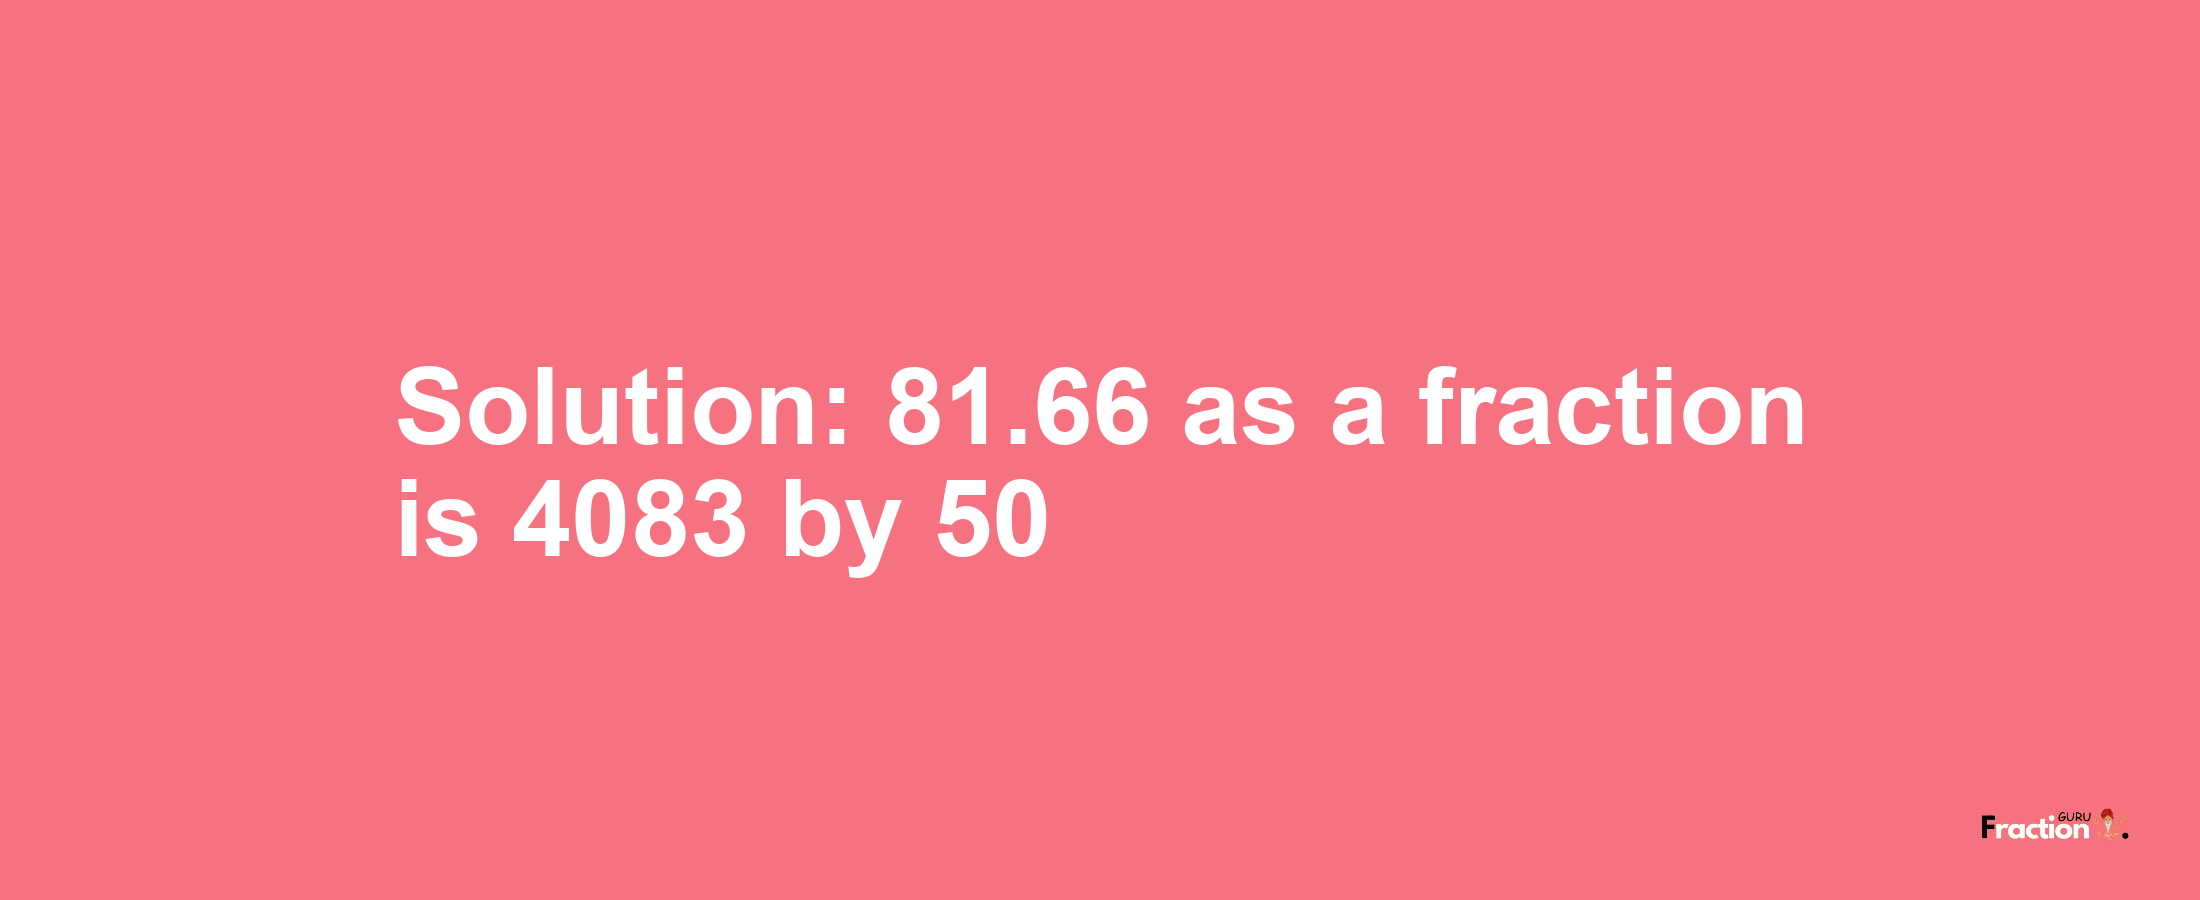 Solution:81.66 as a fraction is 4083/50